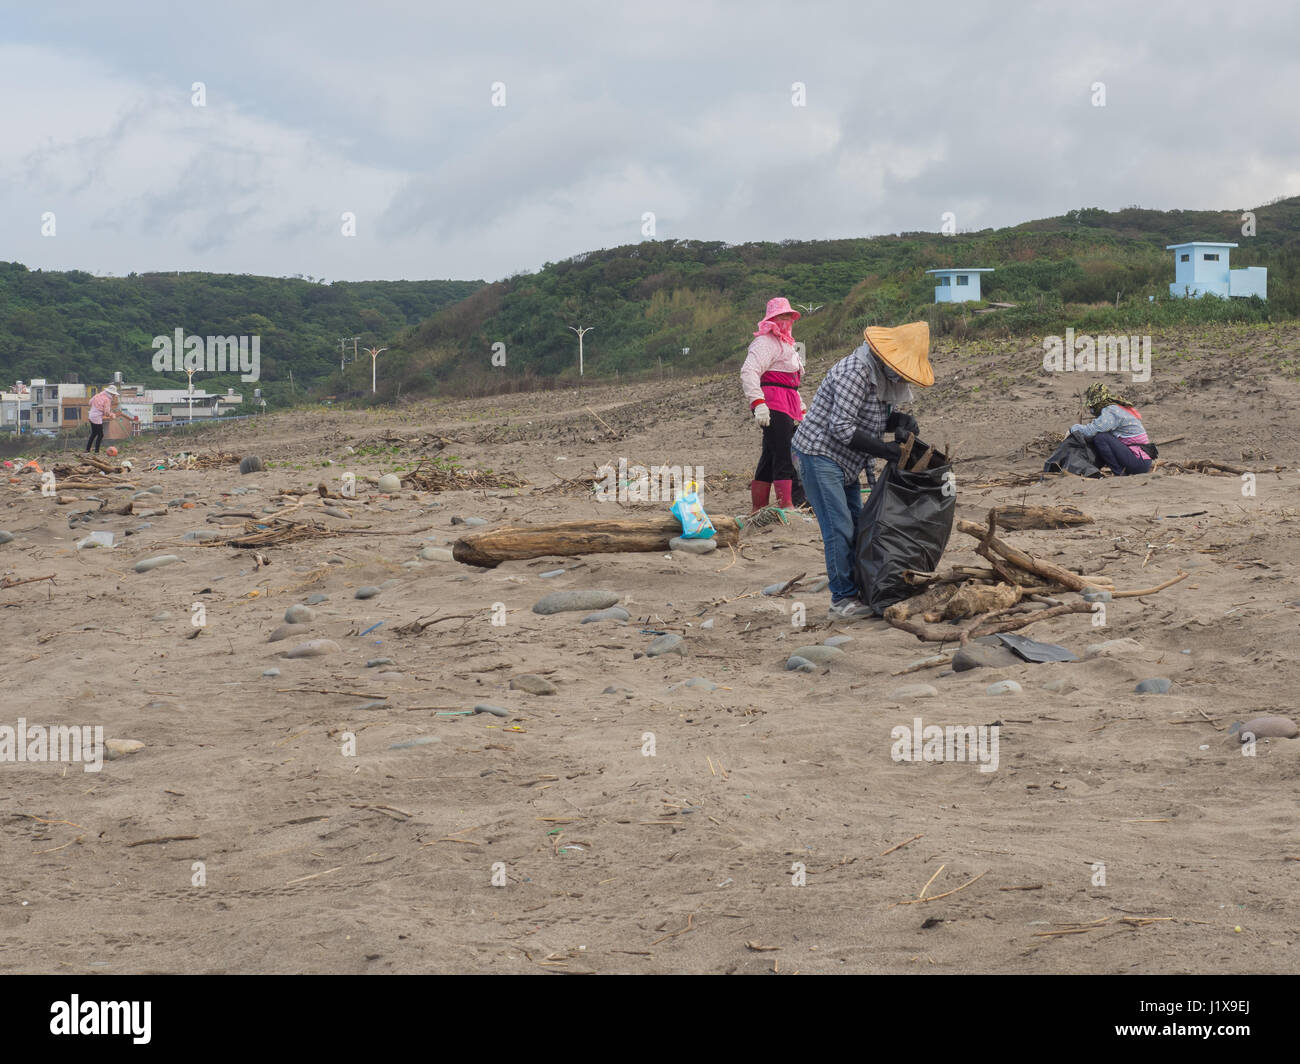 Shimen, Taiwan - October 03, 2016: Women in hats and masks on  faces cleaning up a beach by the ocean Stock Photo